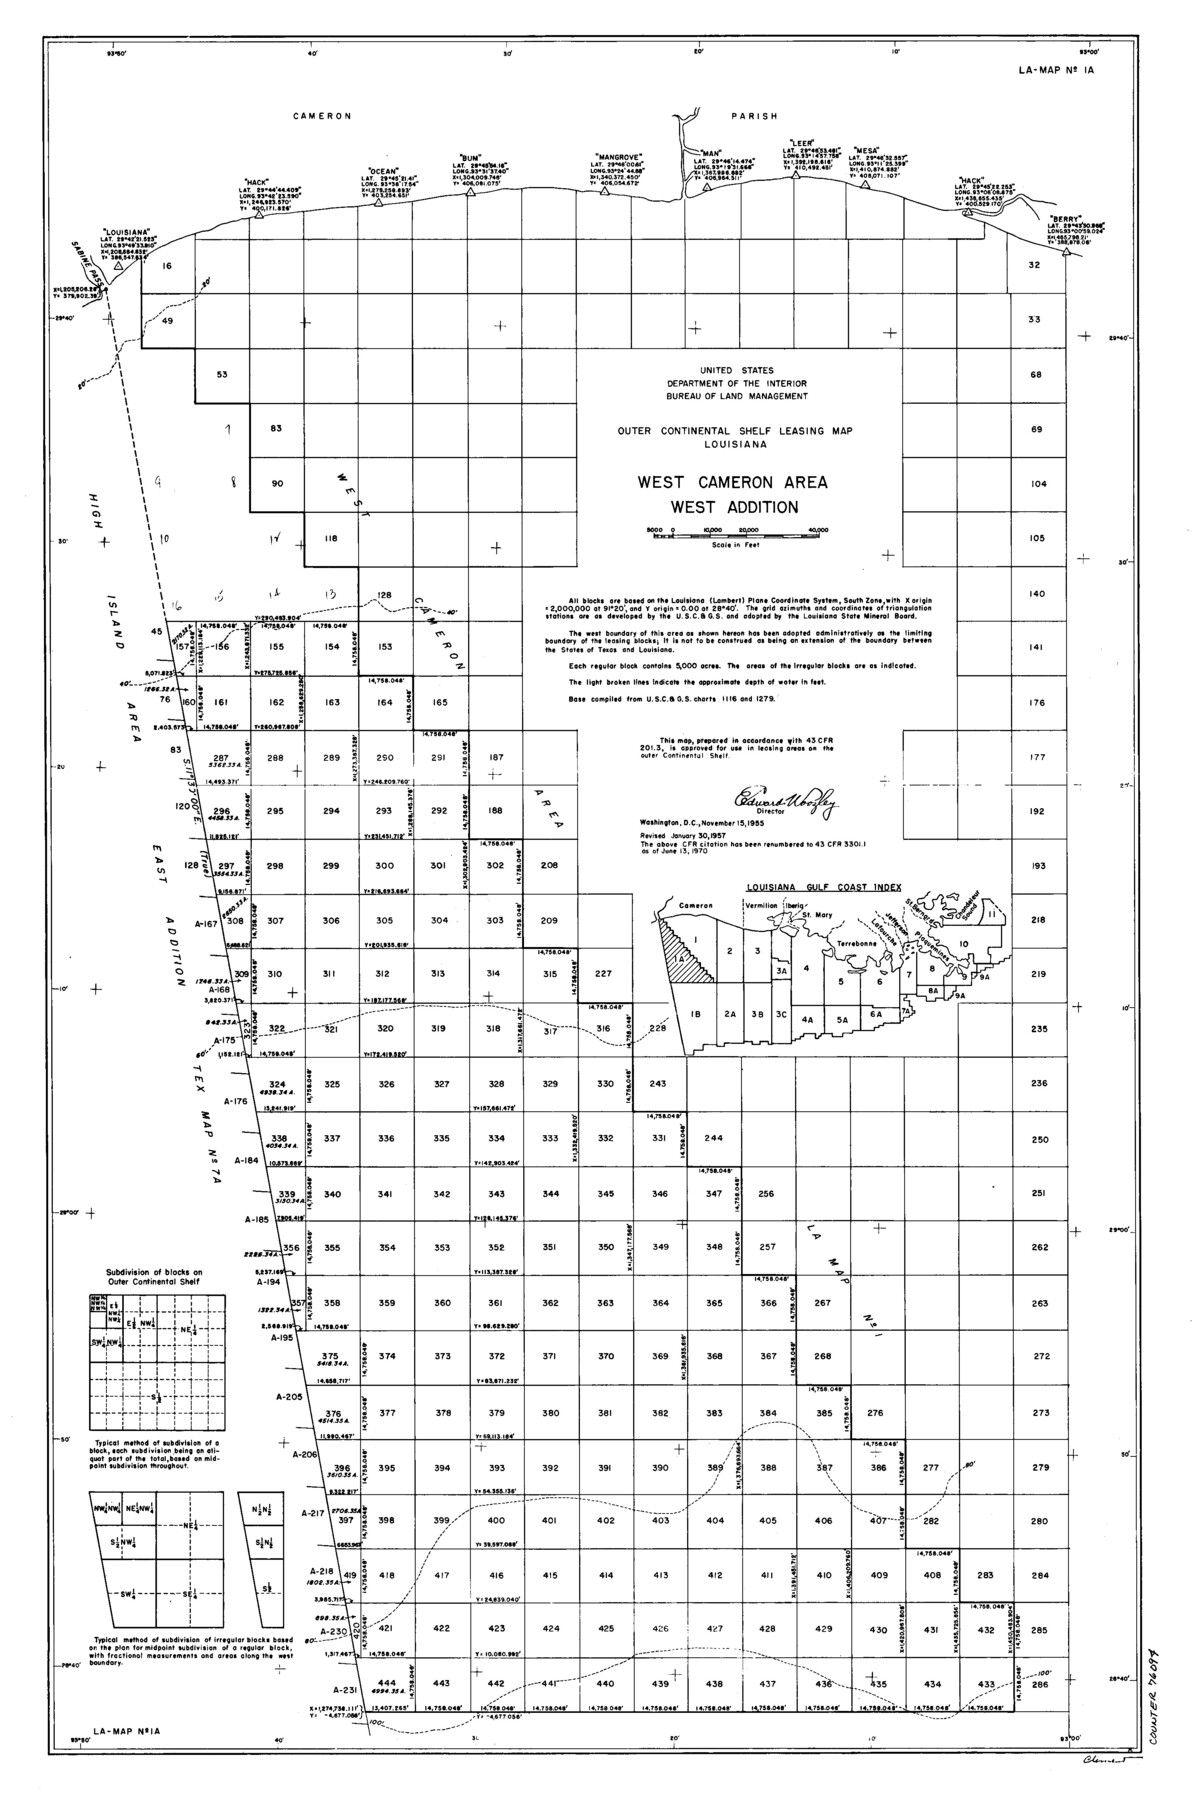 76094, Outer Continental Shelf Leasing Maps (Louisiana Offshore Operations), General Map Collection